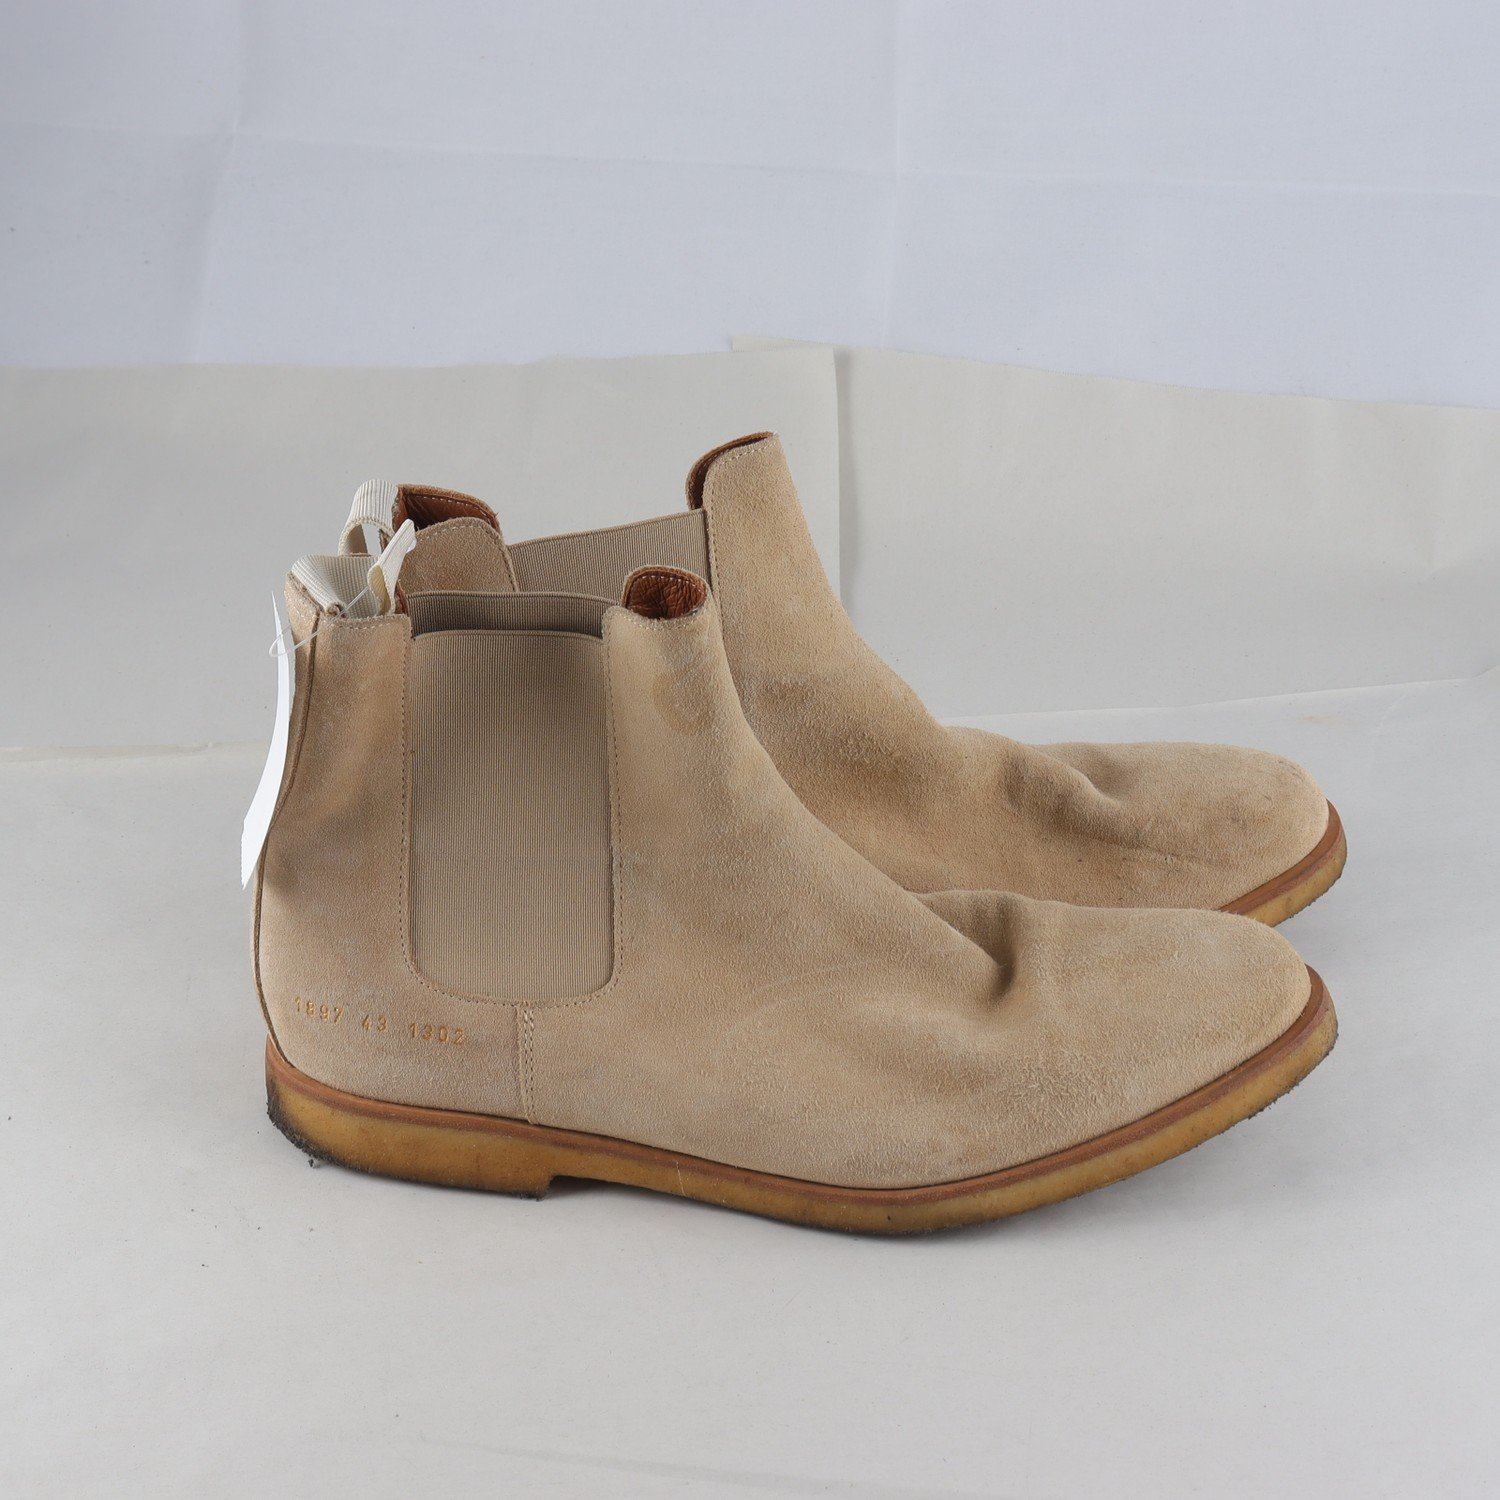 Chelsea boots, Common Projects, mocka läder, stl. 43